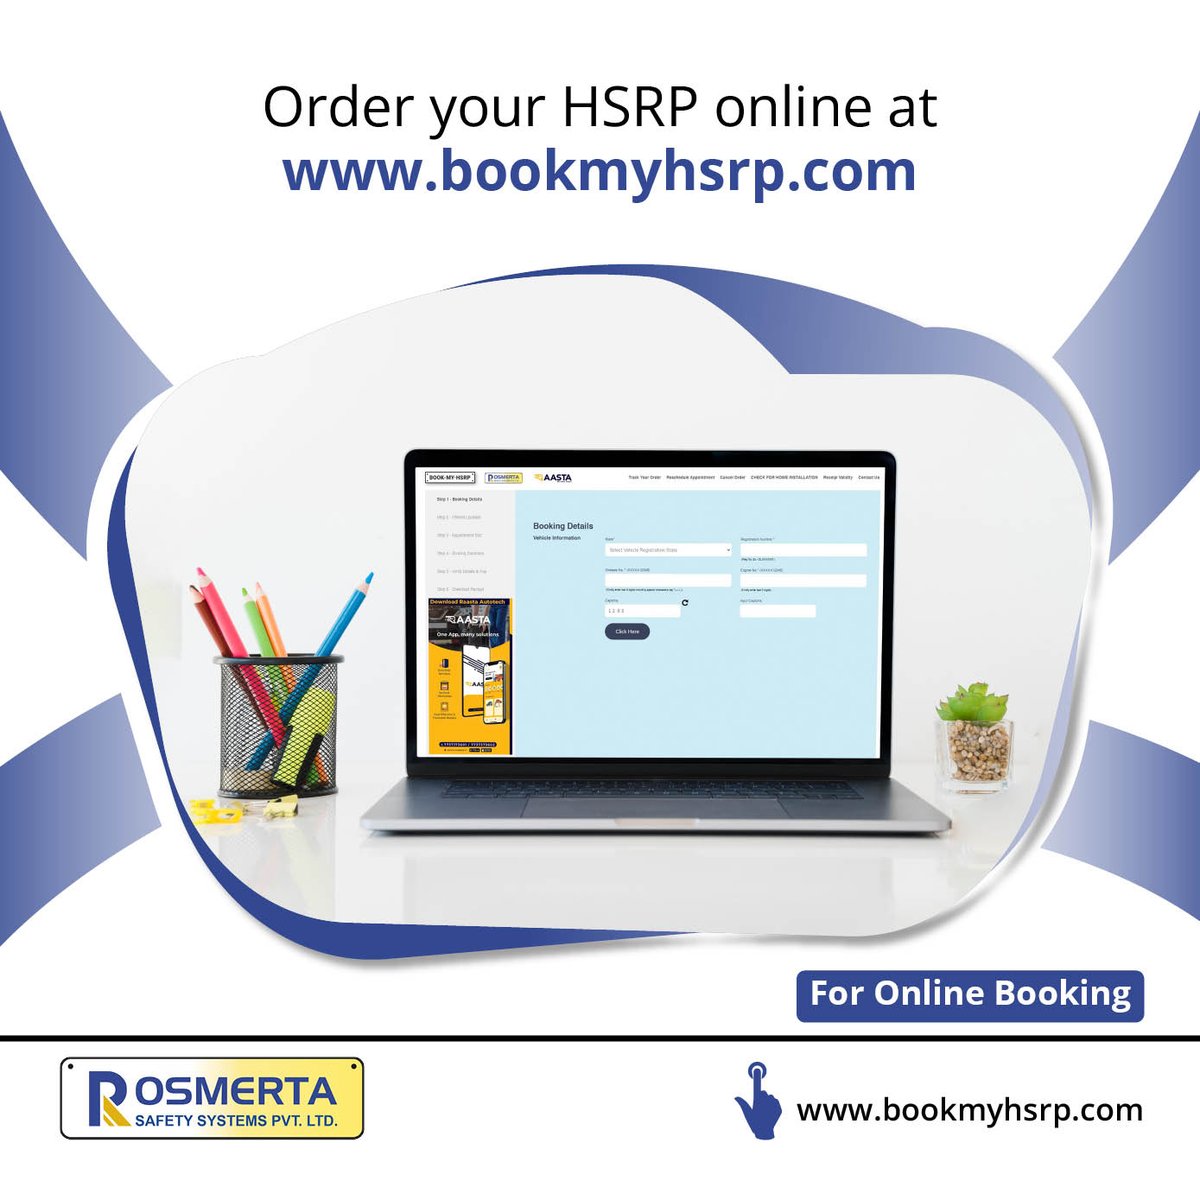 Click now to order your HSRP online and enjoy the benefits of a more secure vehicle. It's a simple step towards safeguarding your ride and giving yourself peace of mind whenever you hit the road.

#highsecuritynumberplates #bookonline